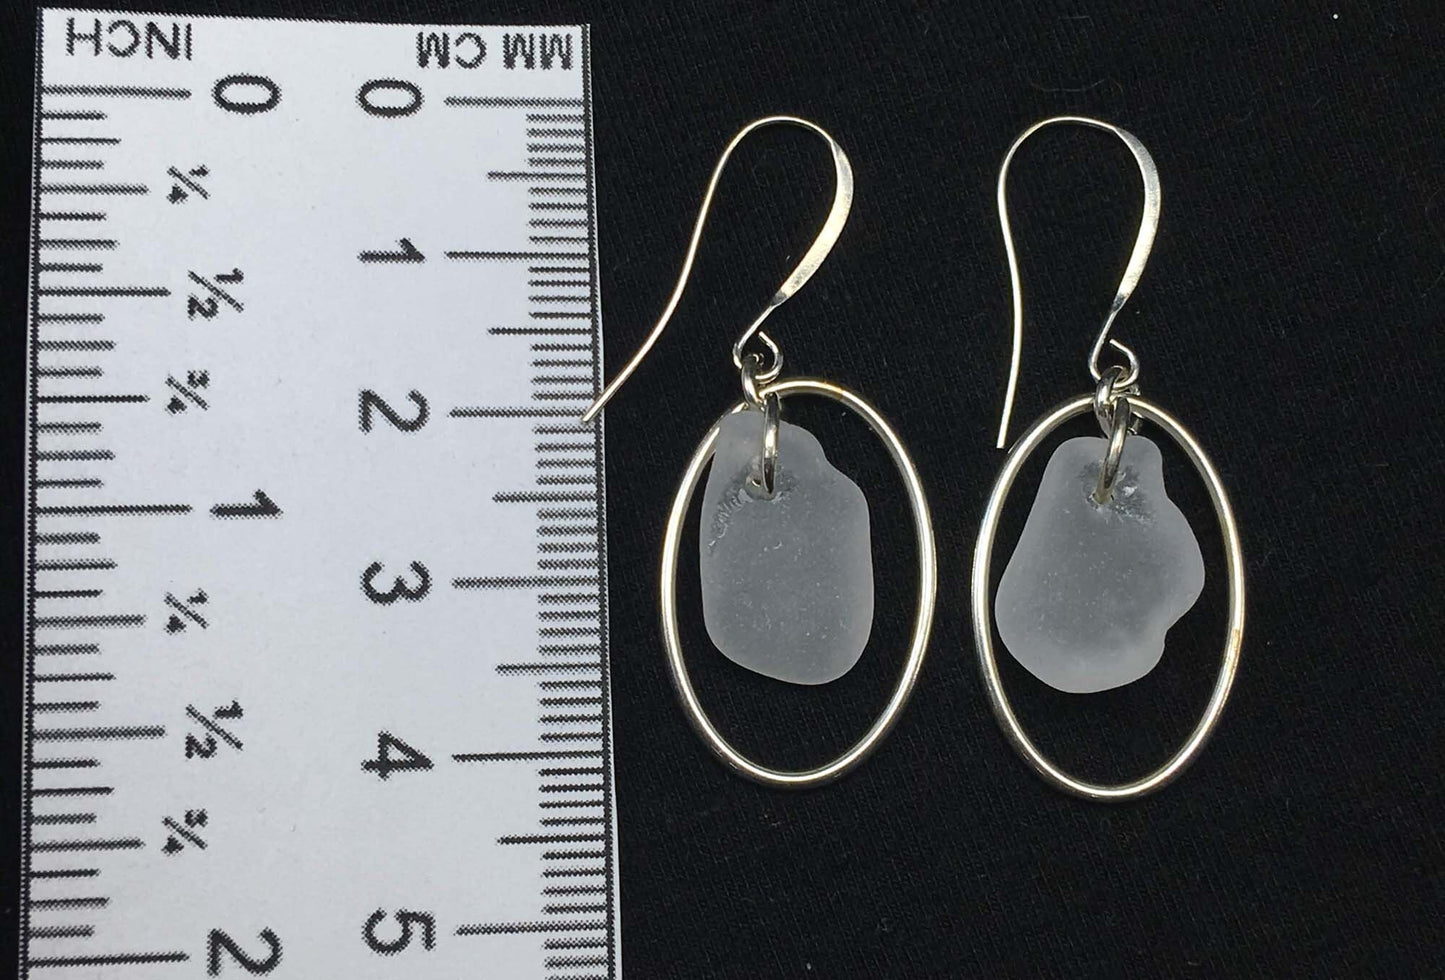 Heaven on Earth Earrings - White sea glass from Cape Breton, Nova Scotia with Sterling Silver Ovals on a nickle-free hook